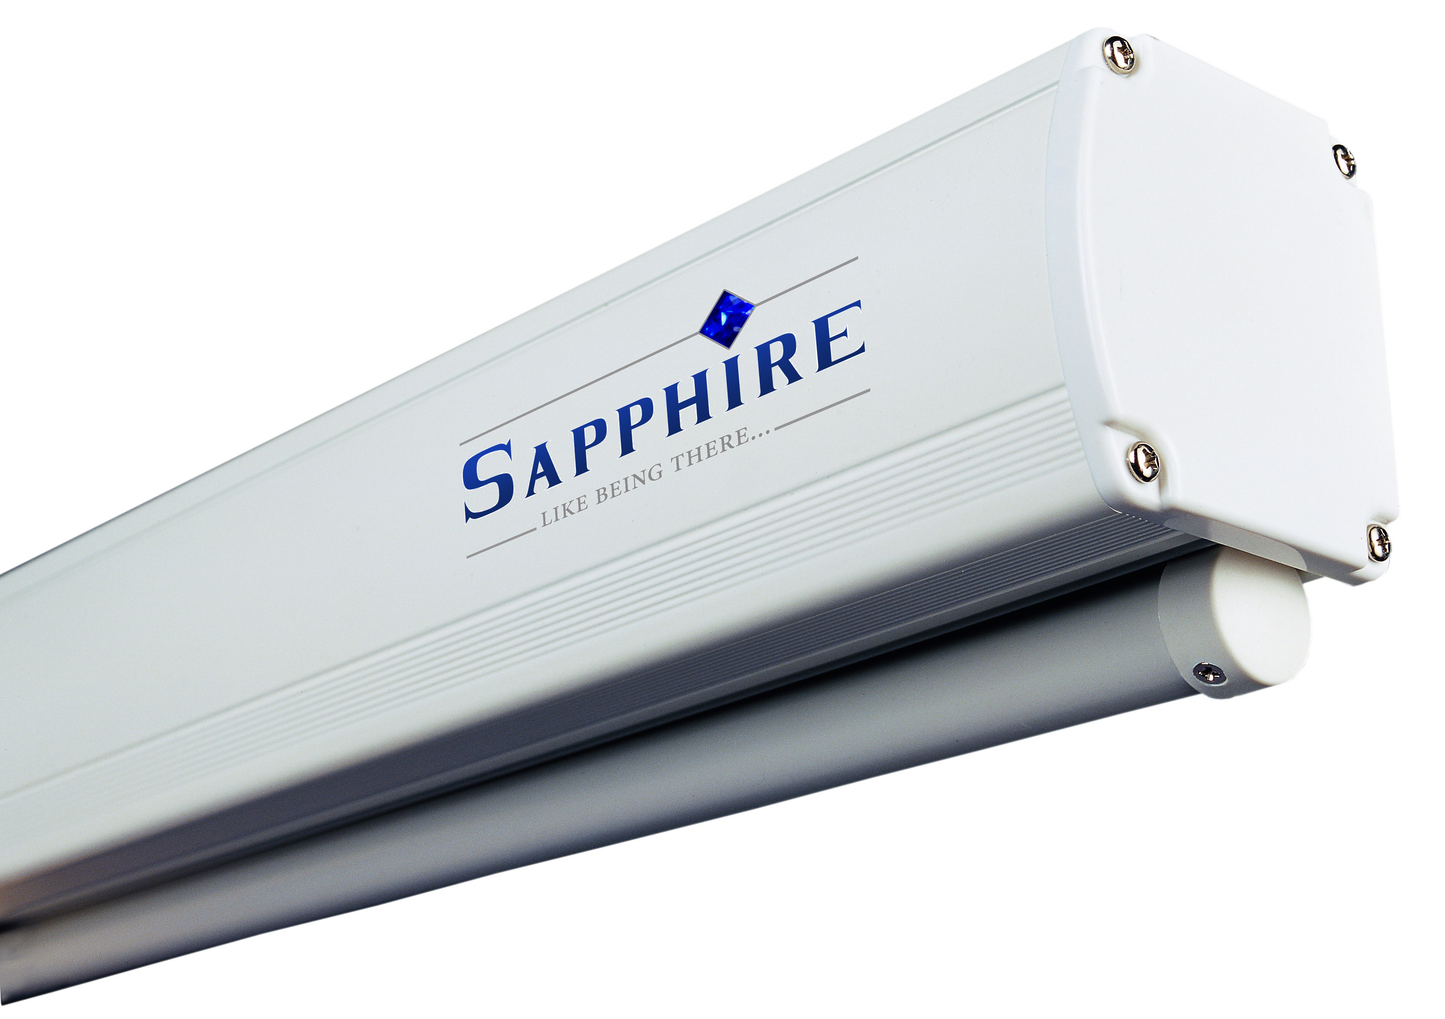 Sapphire Aluminum Slow Retraction Manual Screen 4:3 Format Viewing Area 2030mm x 1520mm with channel fix brackets Approx Case Dimensions L 2204mm x H 93mm x D 79mm